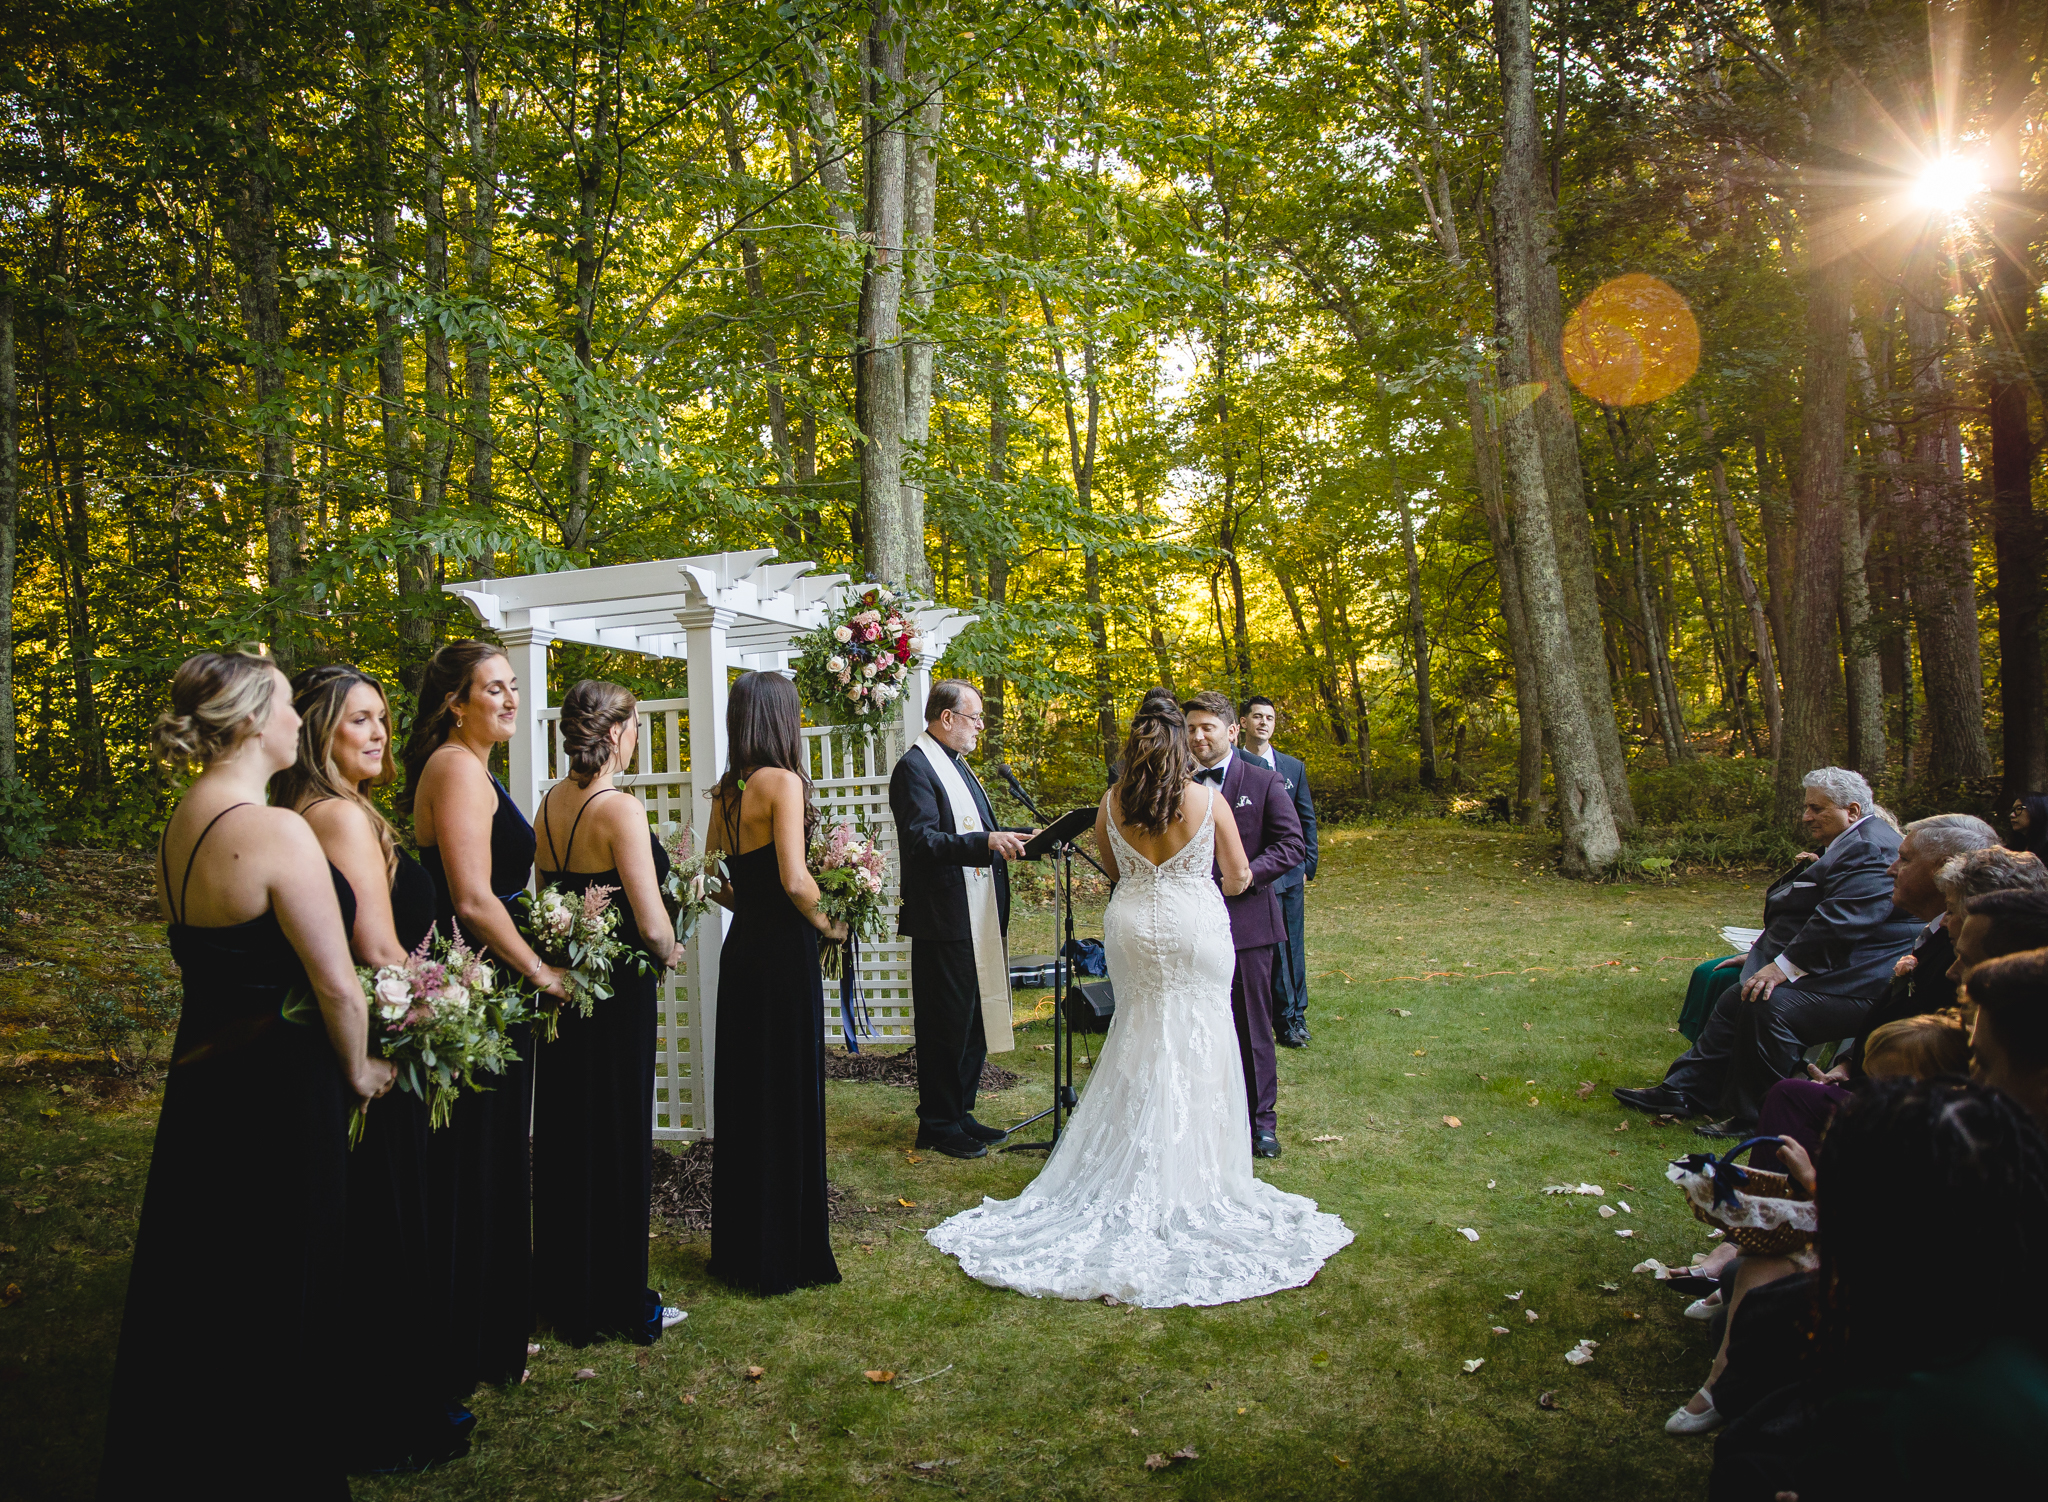 planning backyard wedding When you're engaged, you might start wondering how the cost of backyard weddings stack up against a tradition venue wedding. This post breaks it all down for you. With different expense types laid out and real case studies of some of my clients' backyard weddings, this post can fully equip you with the knowledge to adequately budget for your backyard wedding.